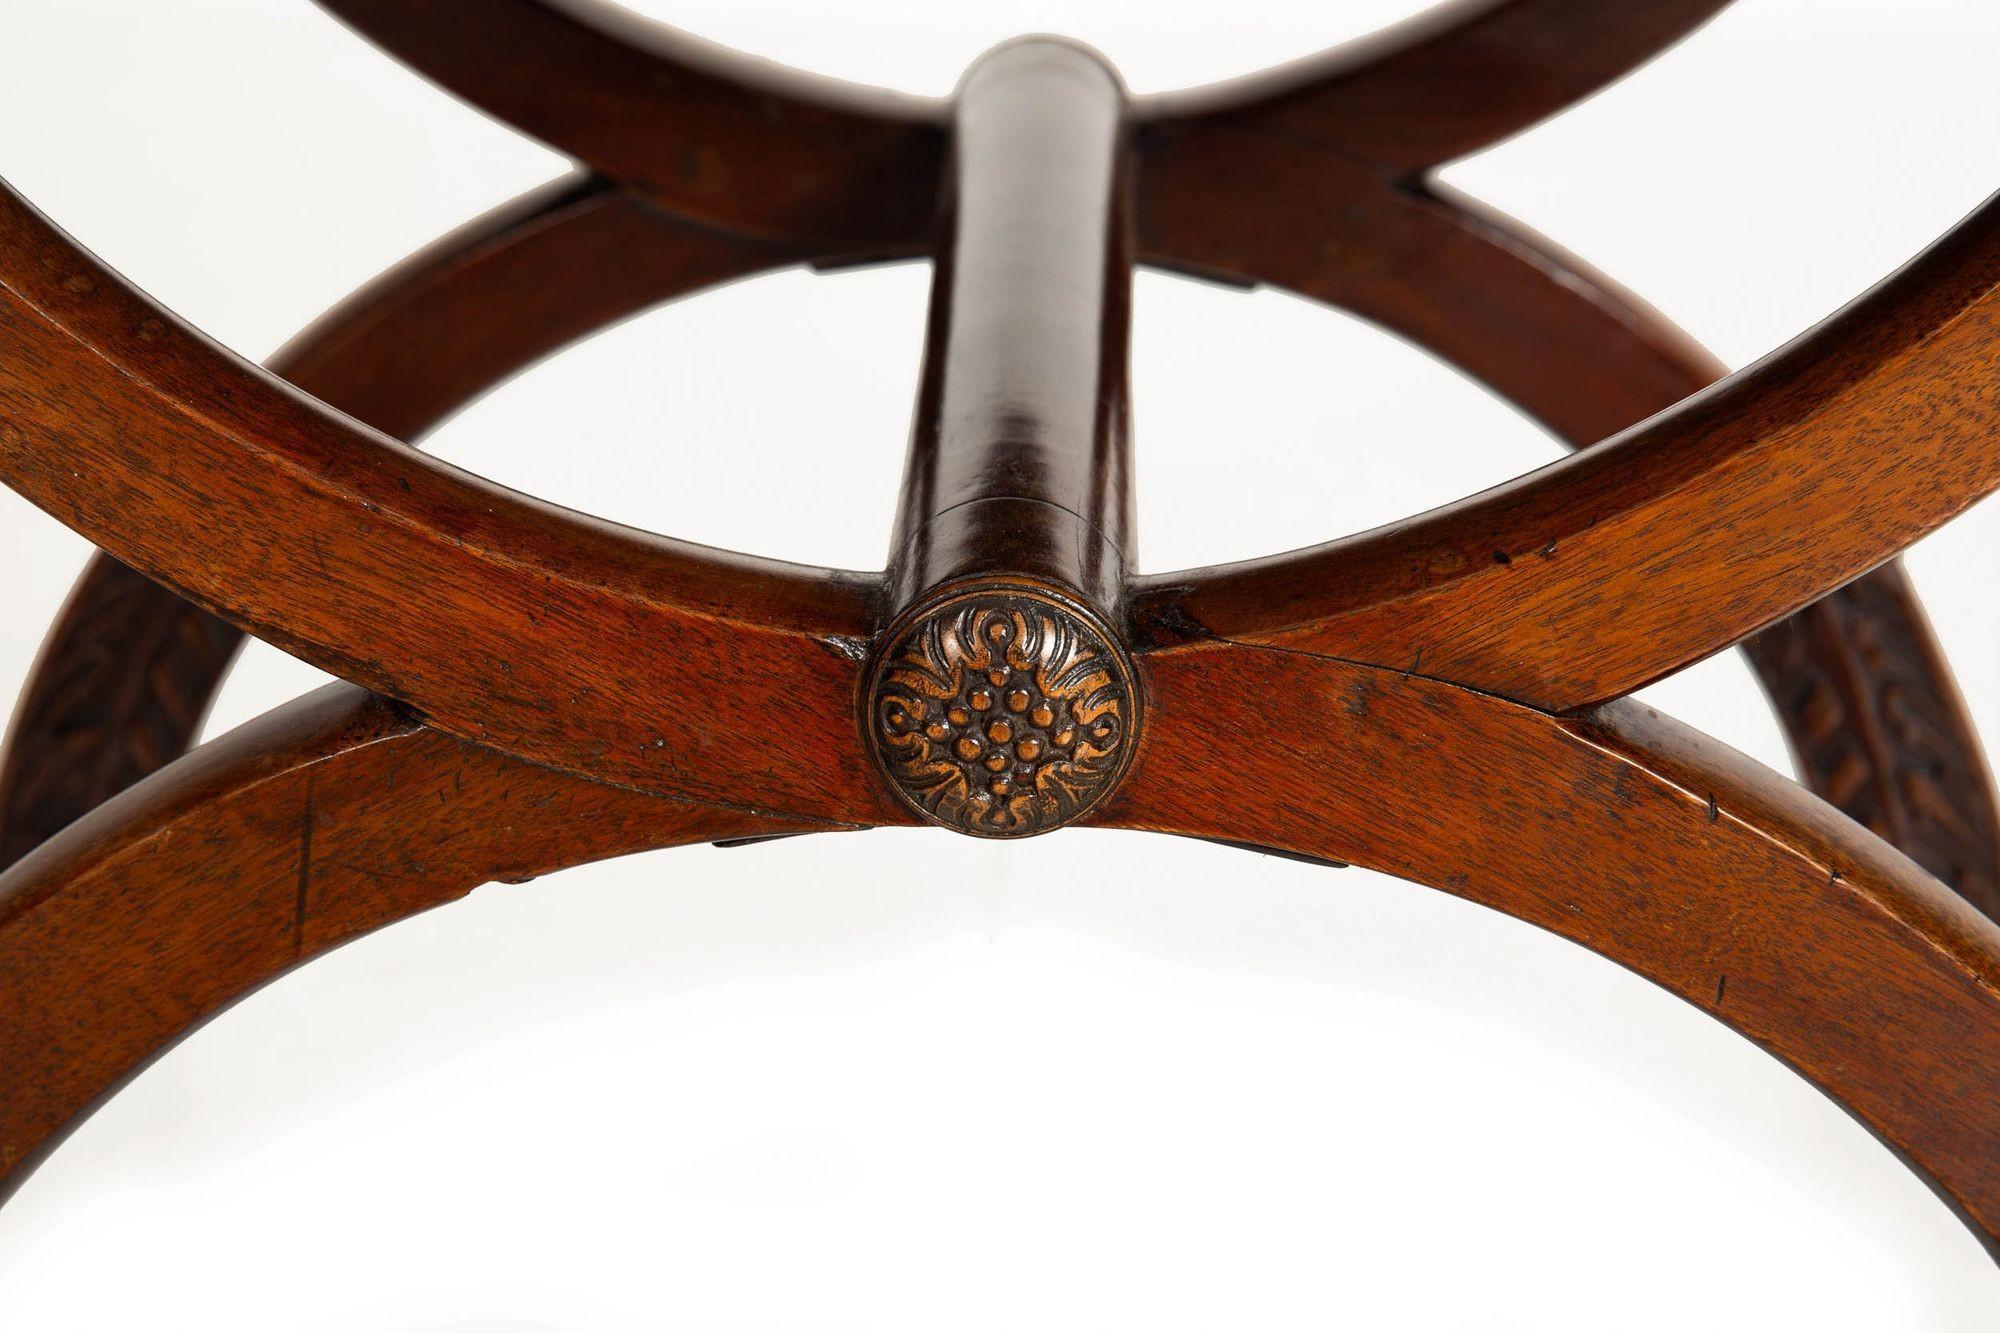 Fine English Regency Antique Mahogany Curule Curved Chair Bench c. 1815 For Sale 6